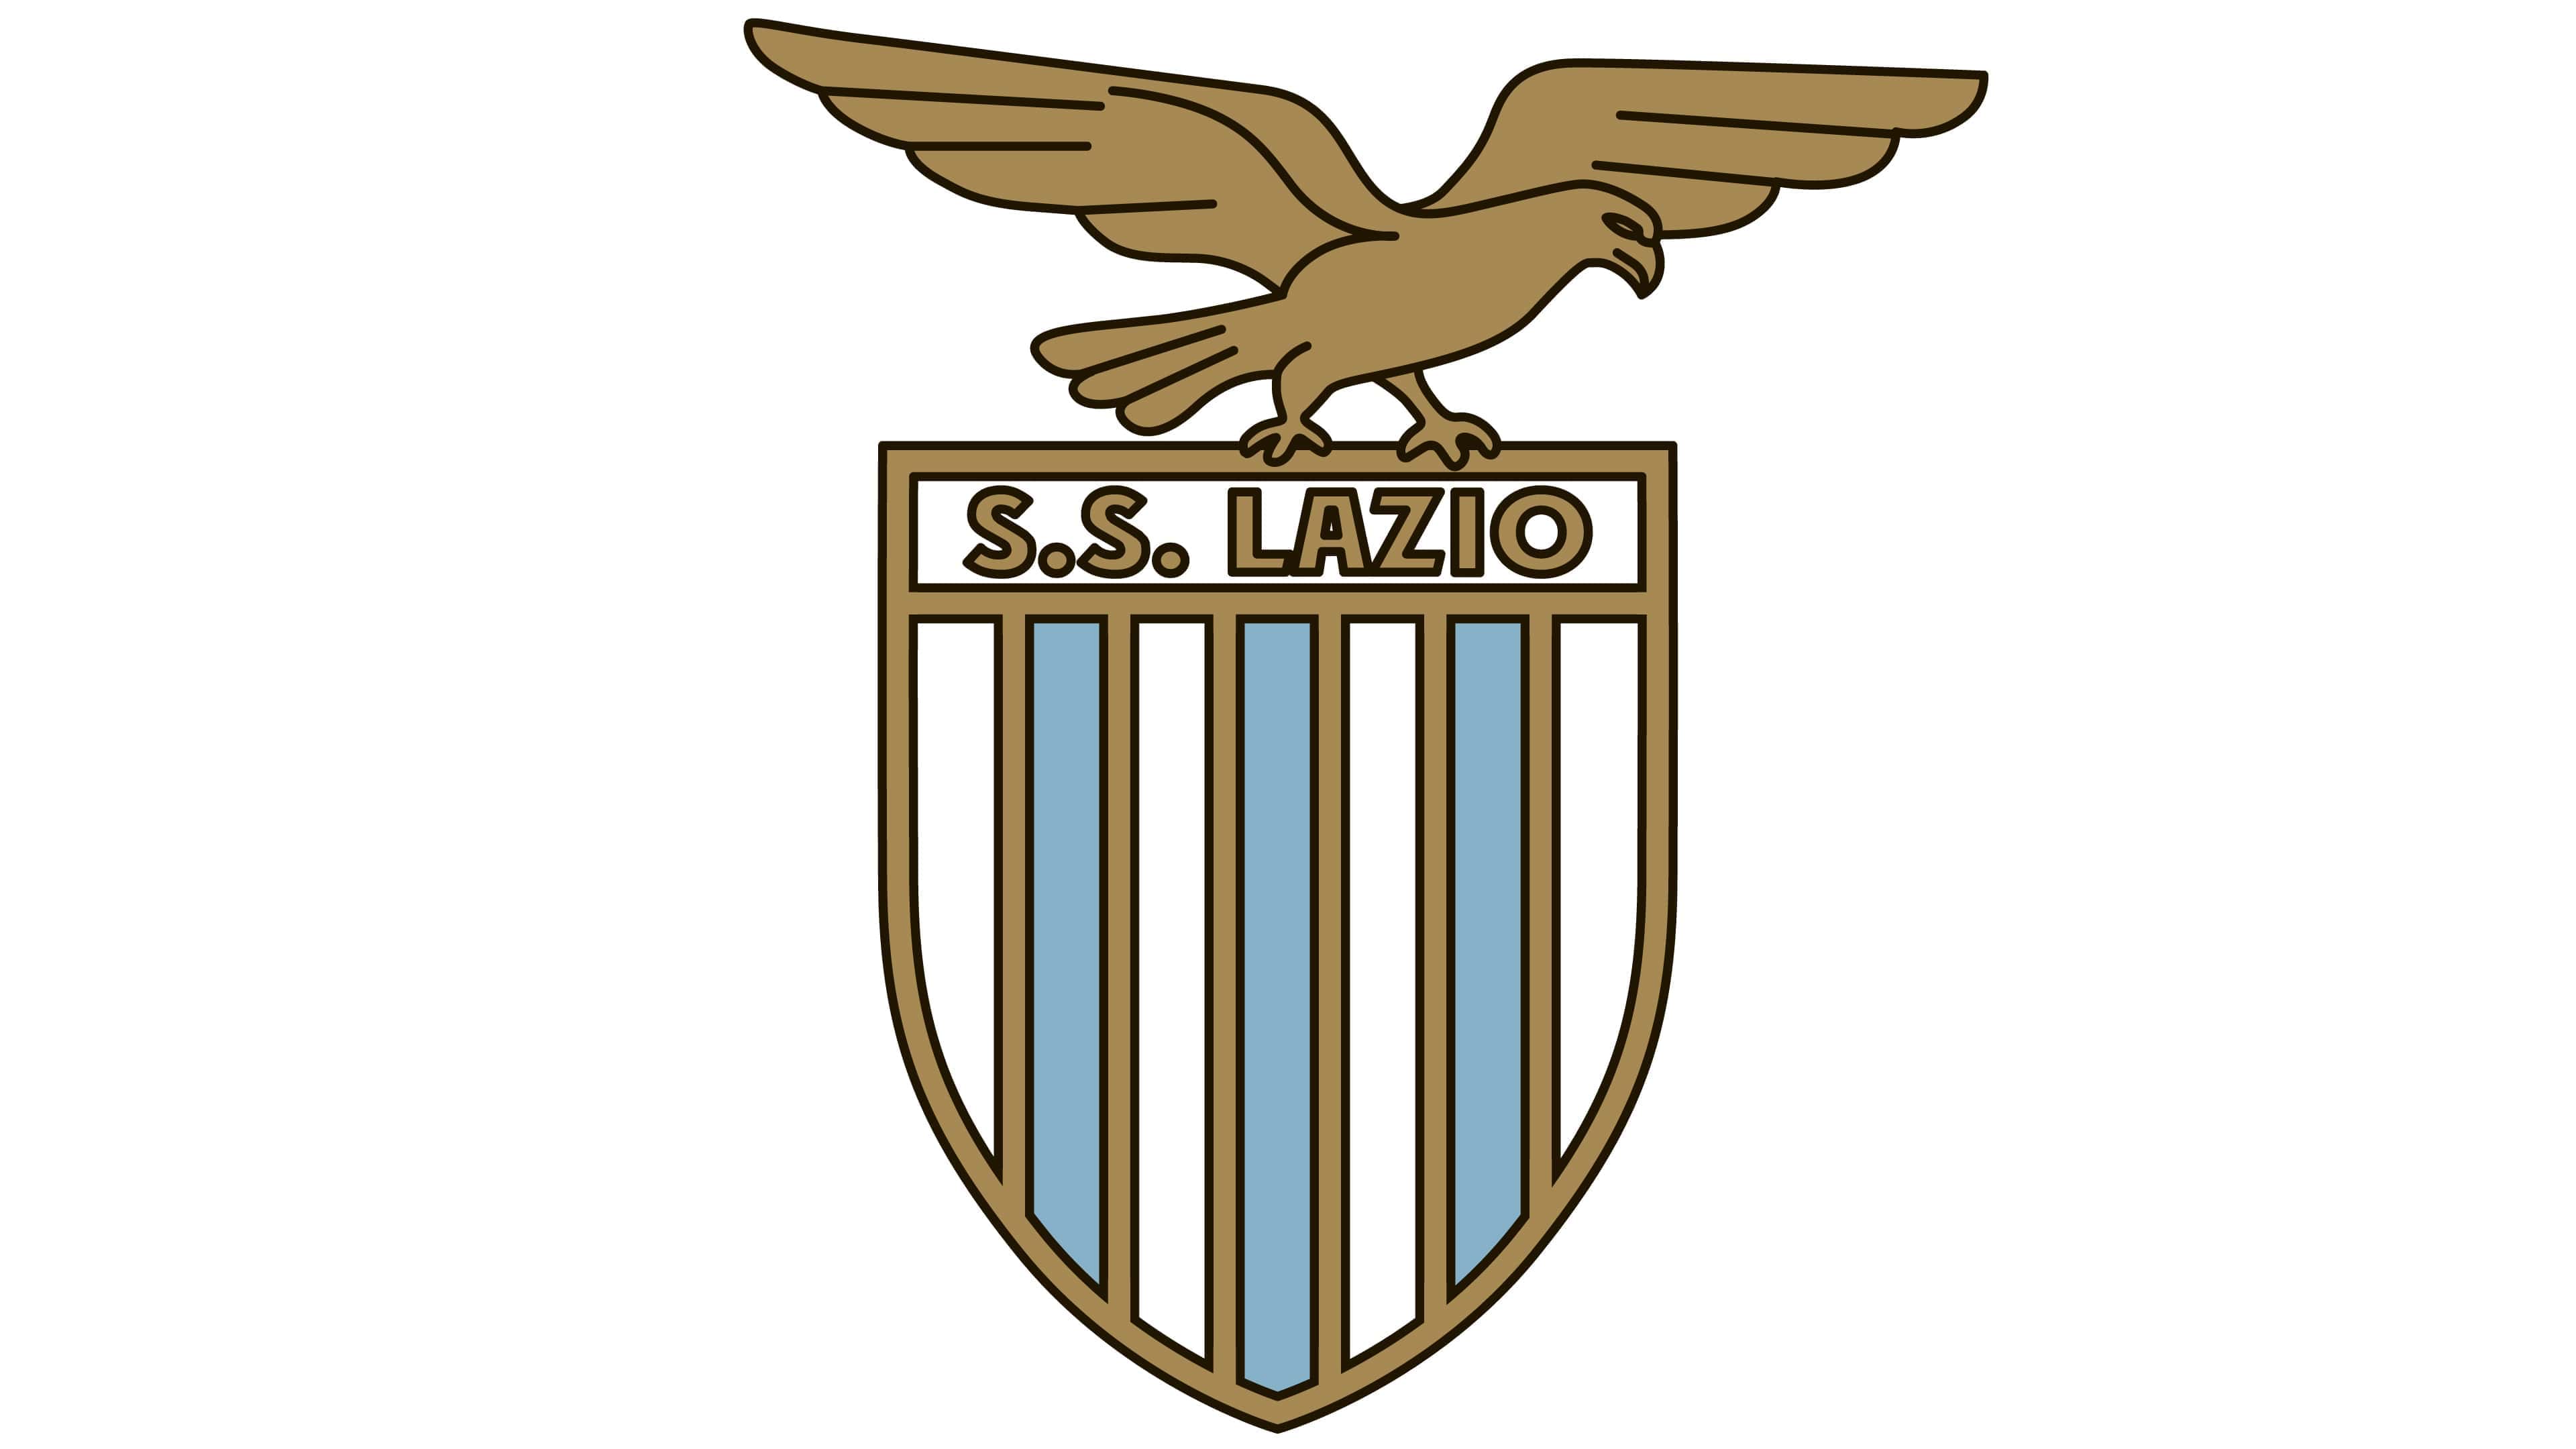 Lazio Logo The Most Famous Brands And Company Logos In The World